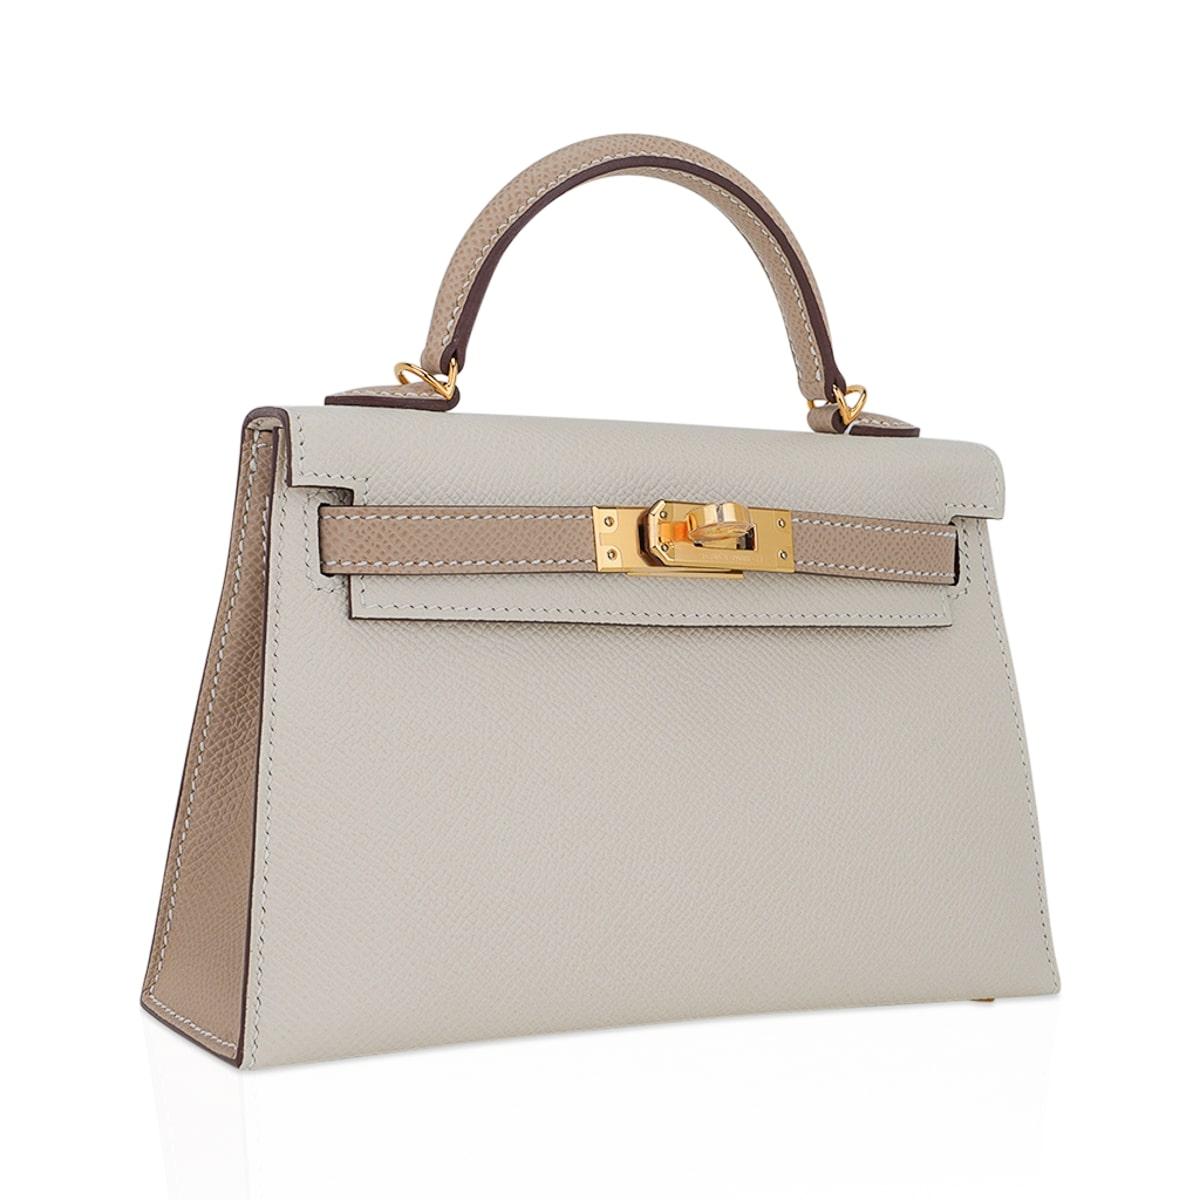 Mightychic offers an Hermes Kelly HSS 20 Sellier mini bag featured in coveted Craie and Trench.
A stunning neutral color combination for year round wear.
Epsom leather accentuated with Gold hardware.
Comes with signature Hermes box, shoulder strap,